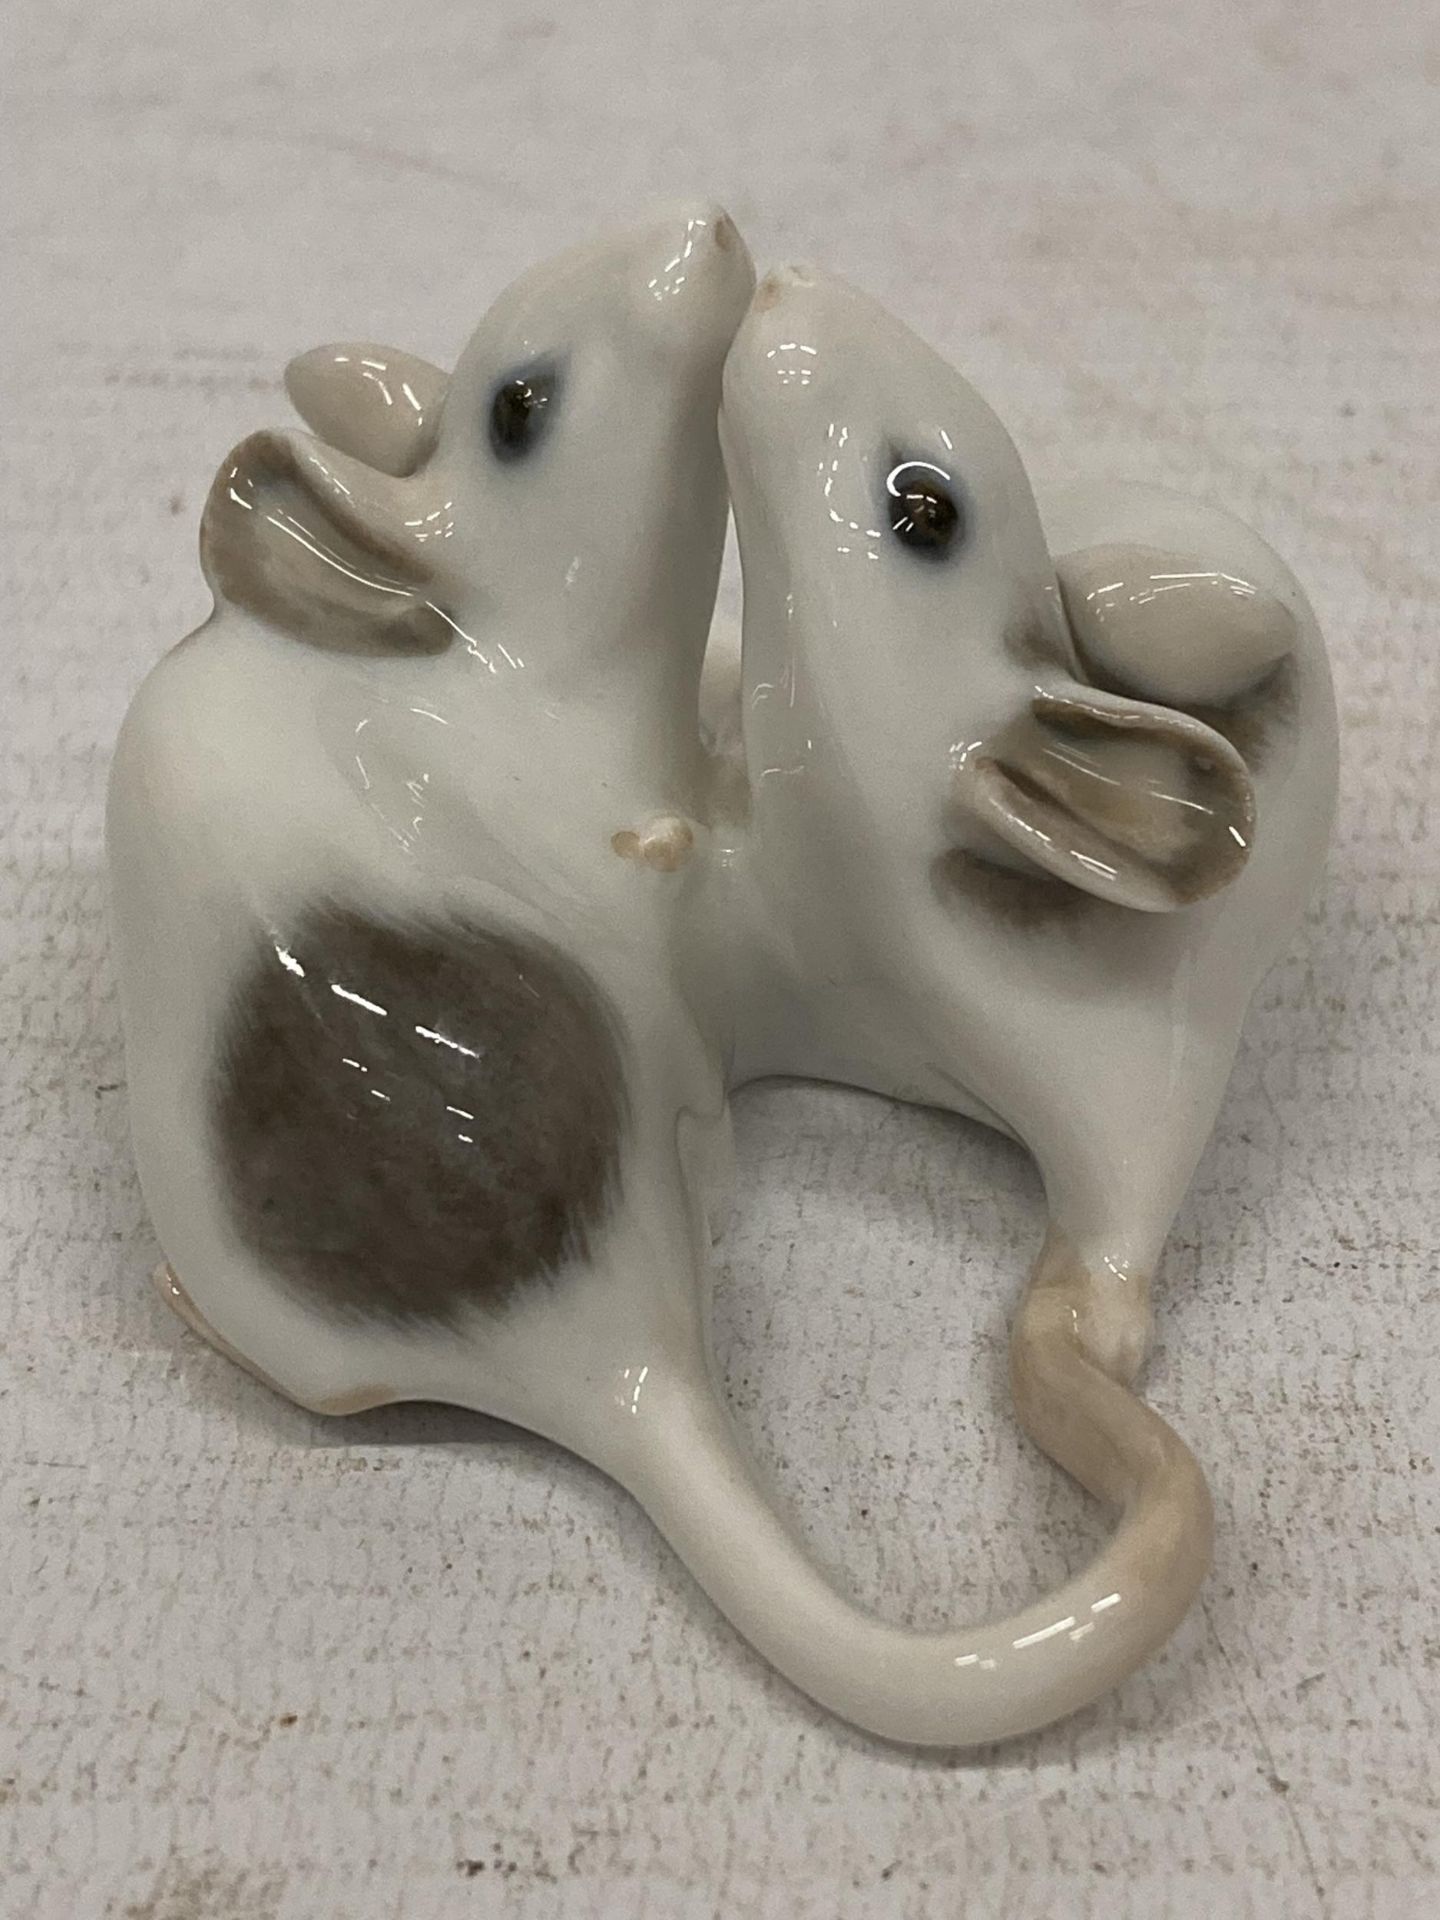 A ROYAL COPENHAGEN 1960 MICE FIGURE, MODEL NUMBER 521, MODELLED BY ARNOLD KROG IN 1903, MARKED TO - Image 2 of 4